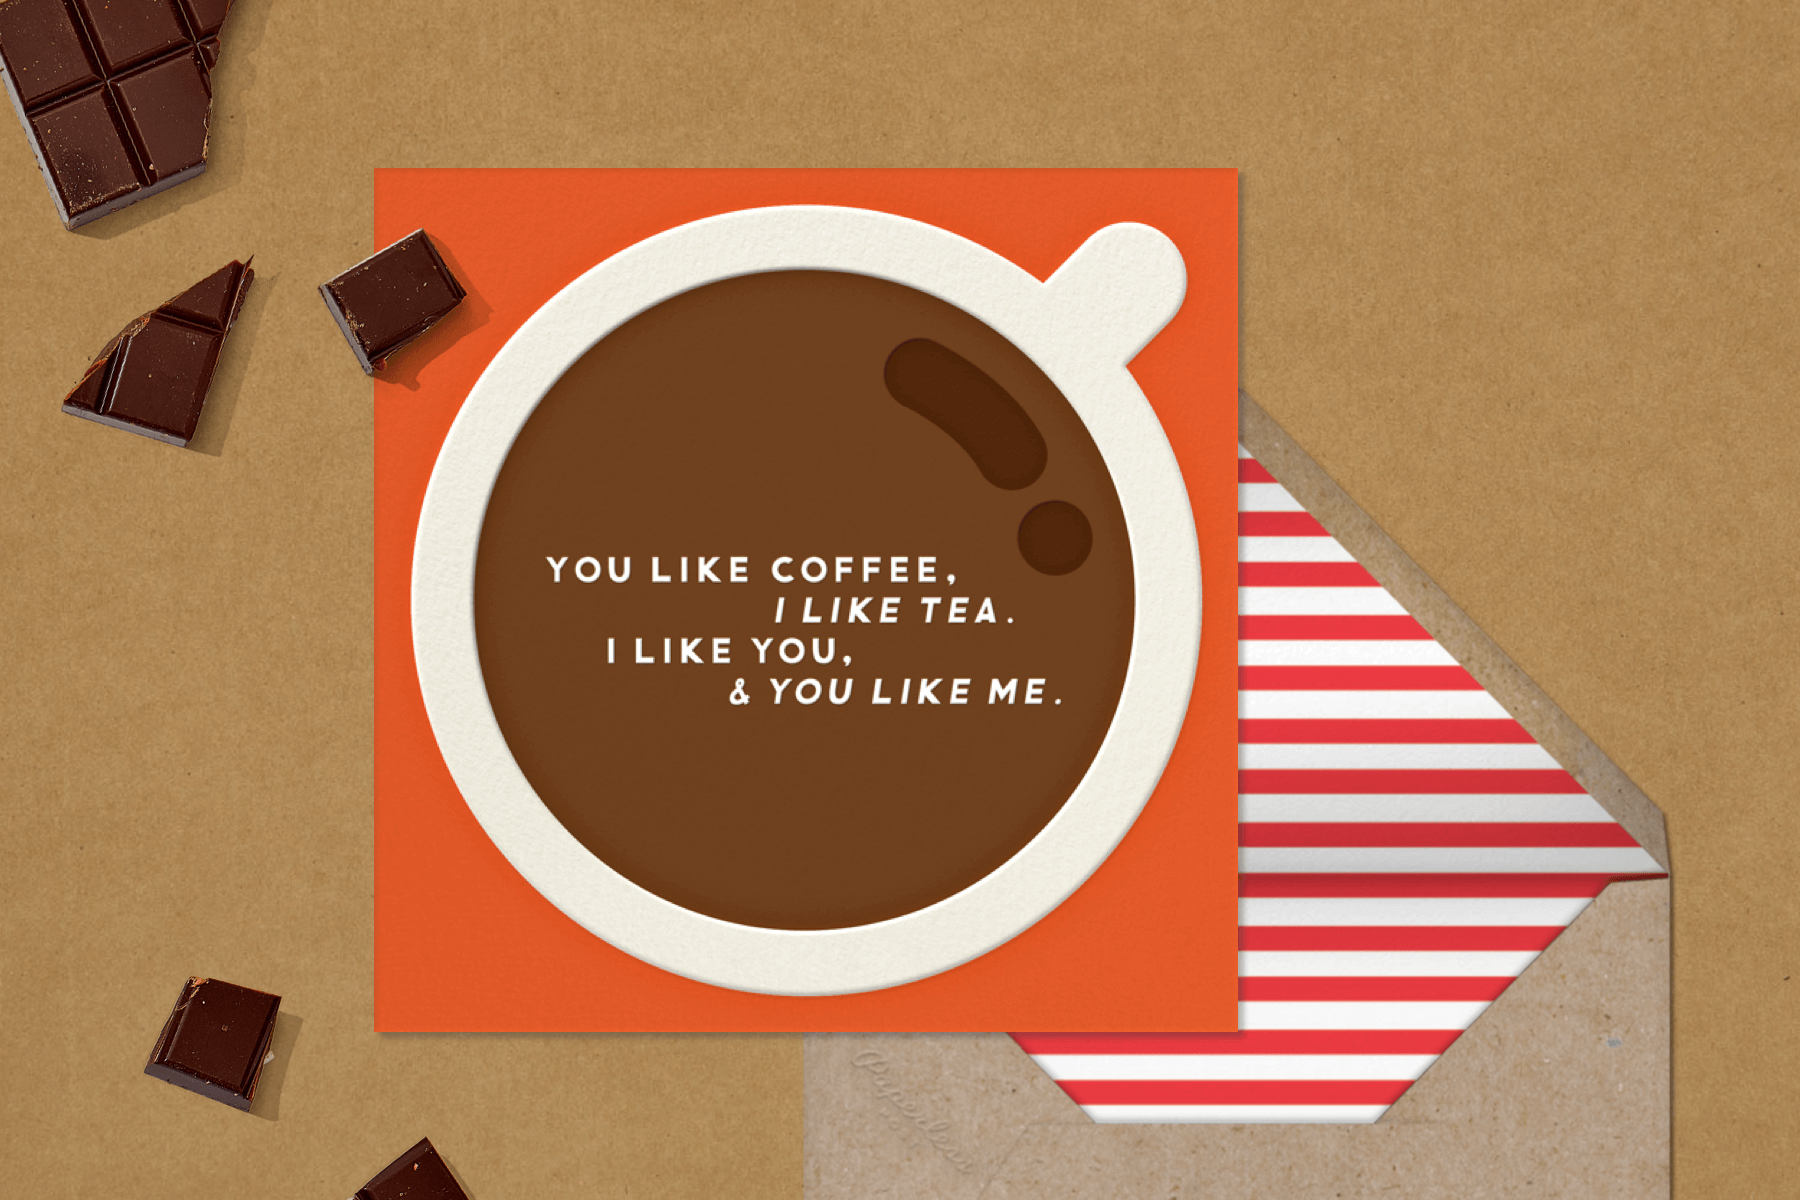 A card with an overhead illustration of a cup of coffee.